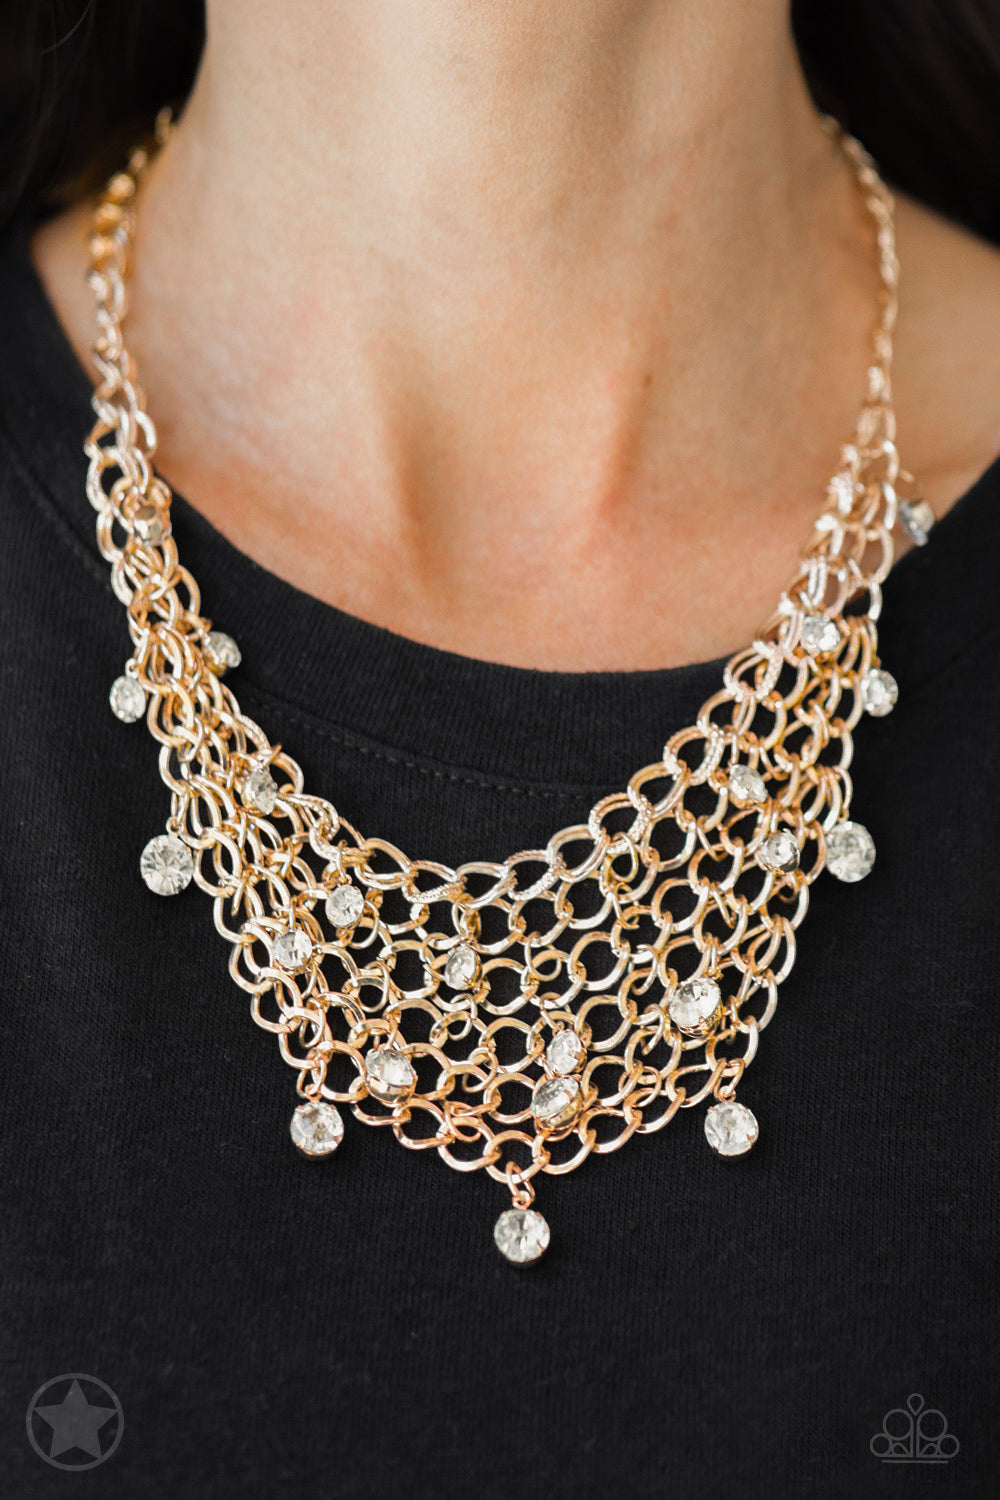 FISHING FOR COMPLIMENTS - GOLD NET MESH WHITE RHINESTONES NECKLACE